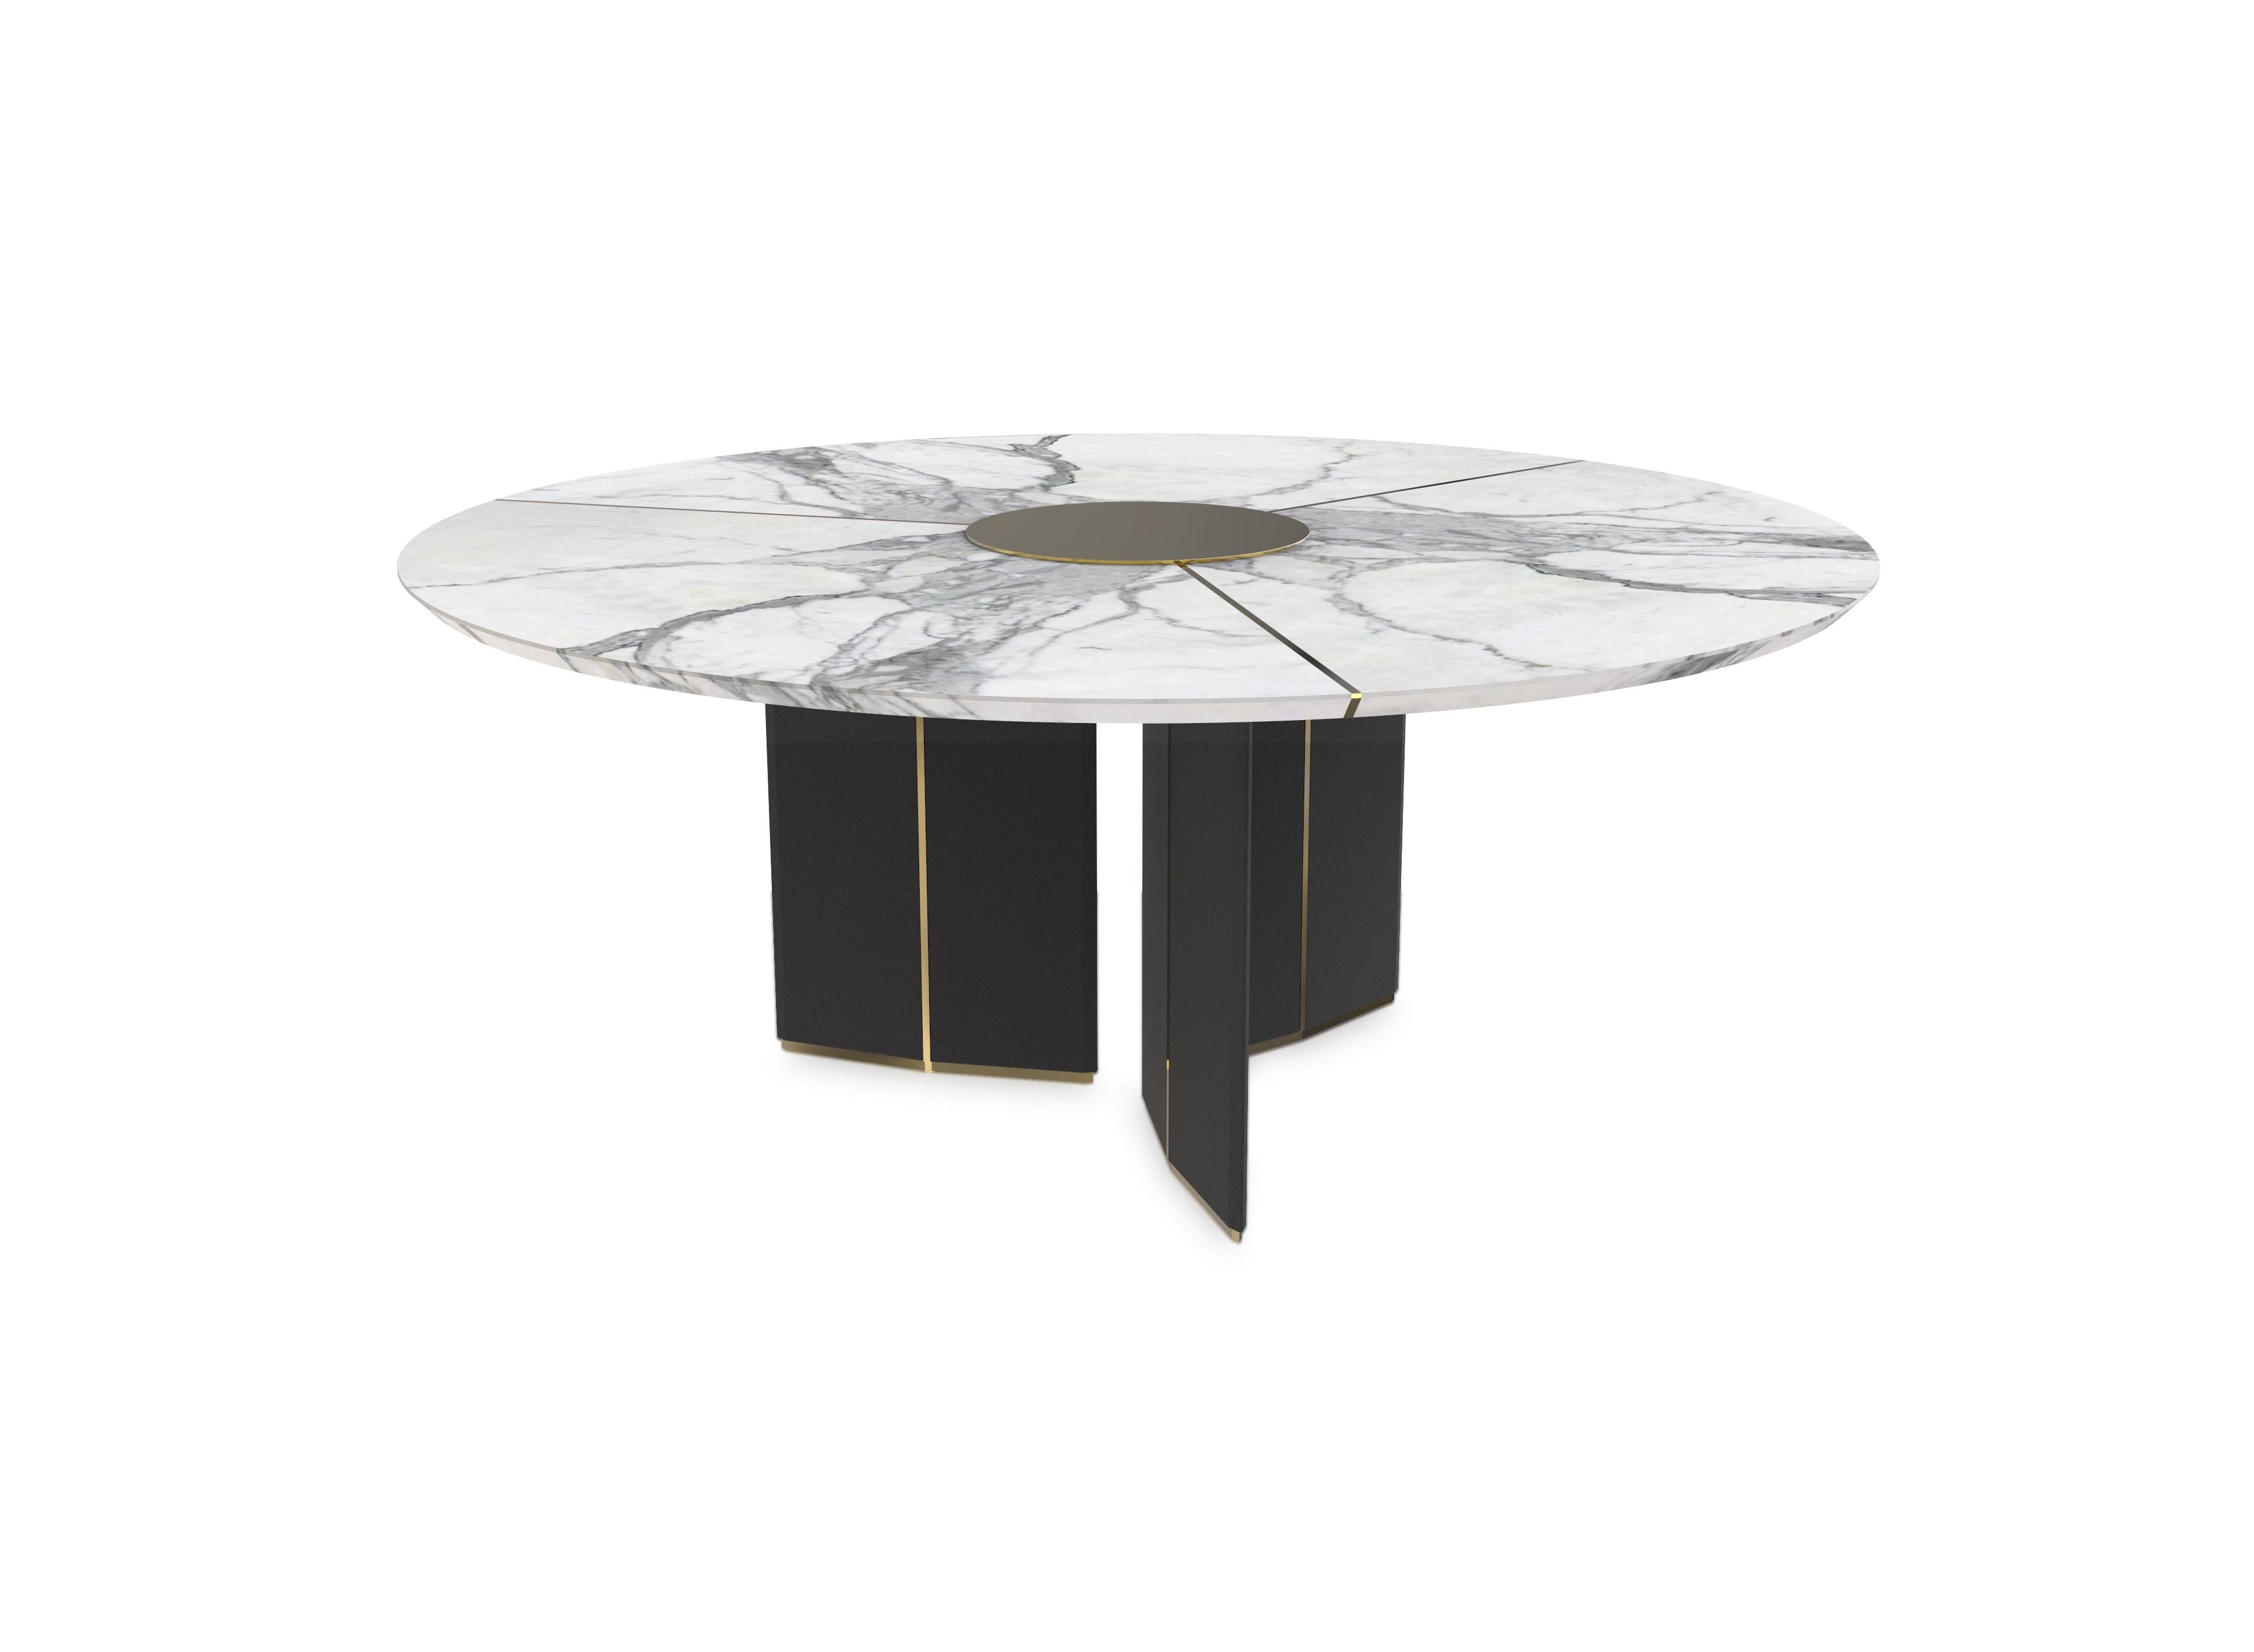 Algerone is an opulent round dining table, inspired by architectural elements, it was designed to remind us of the unique strength and class that only marble has. The Carrara marble circular top is supported by a sleek base adorned with black